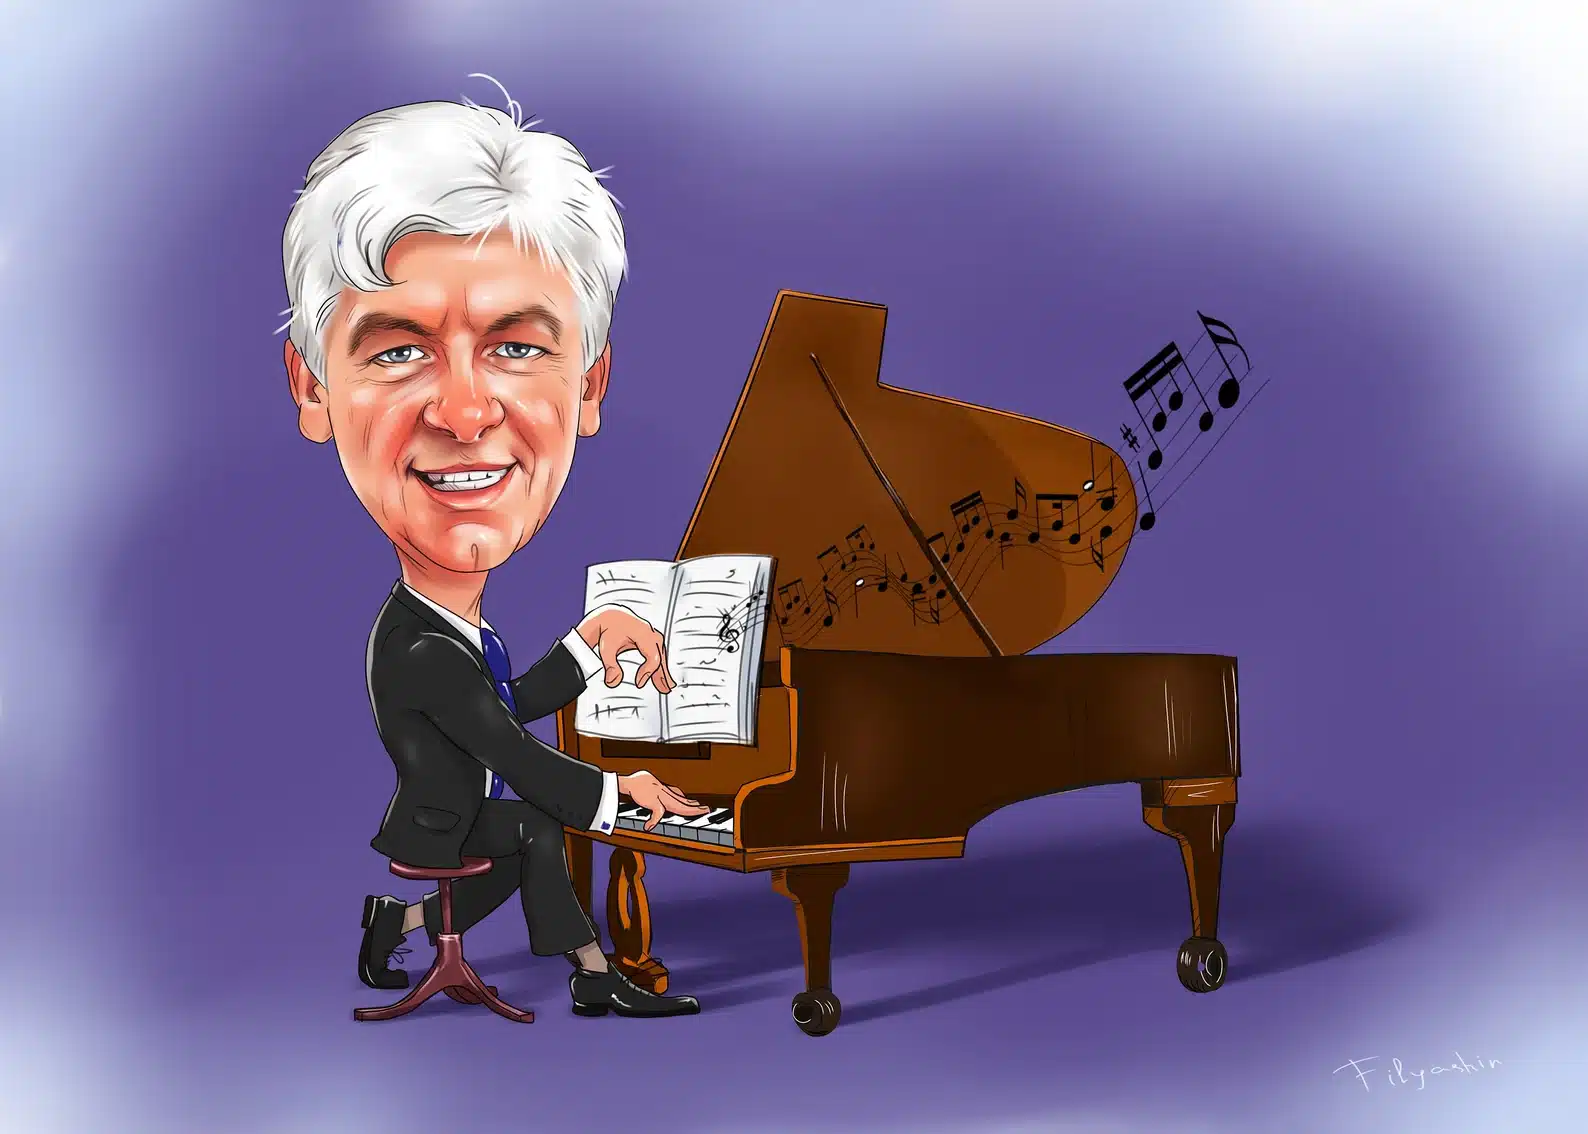 Pianist Gift Caricature Portrait From Photo